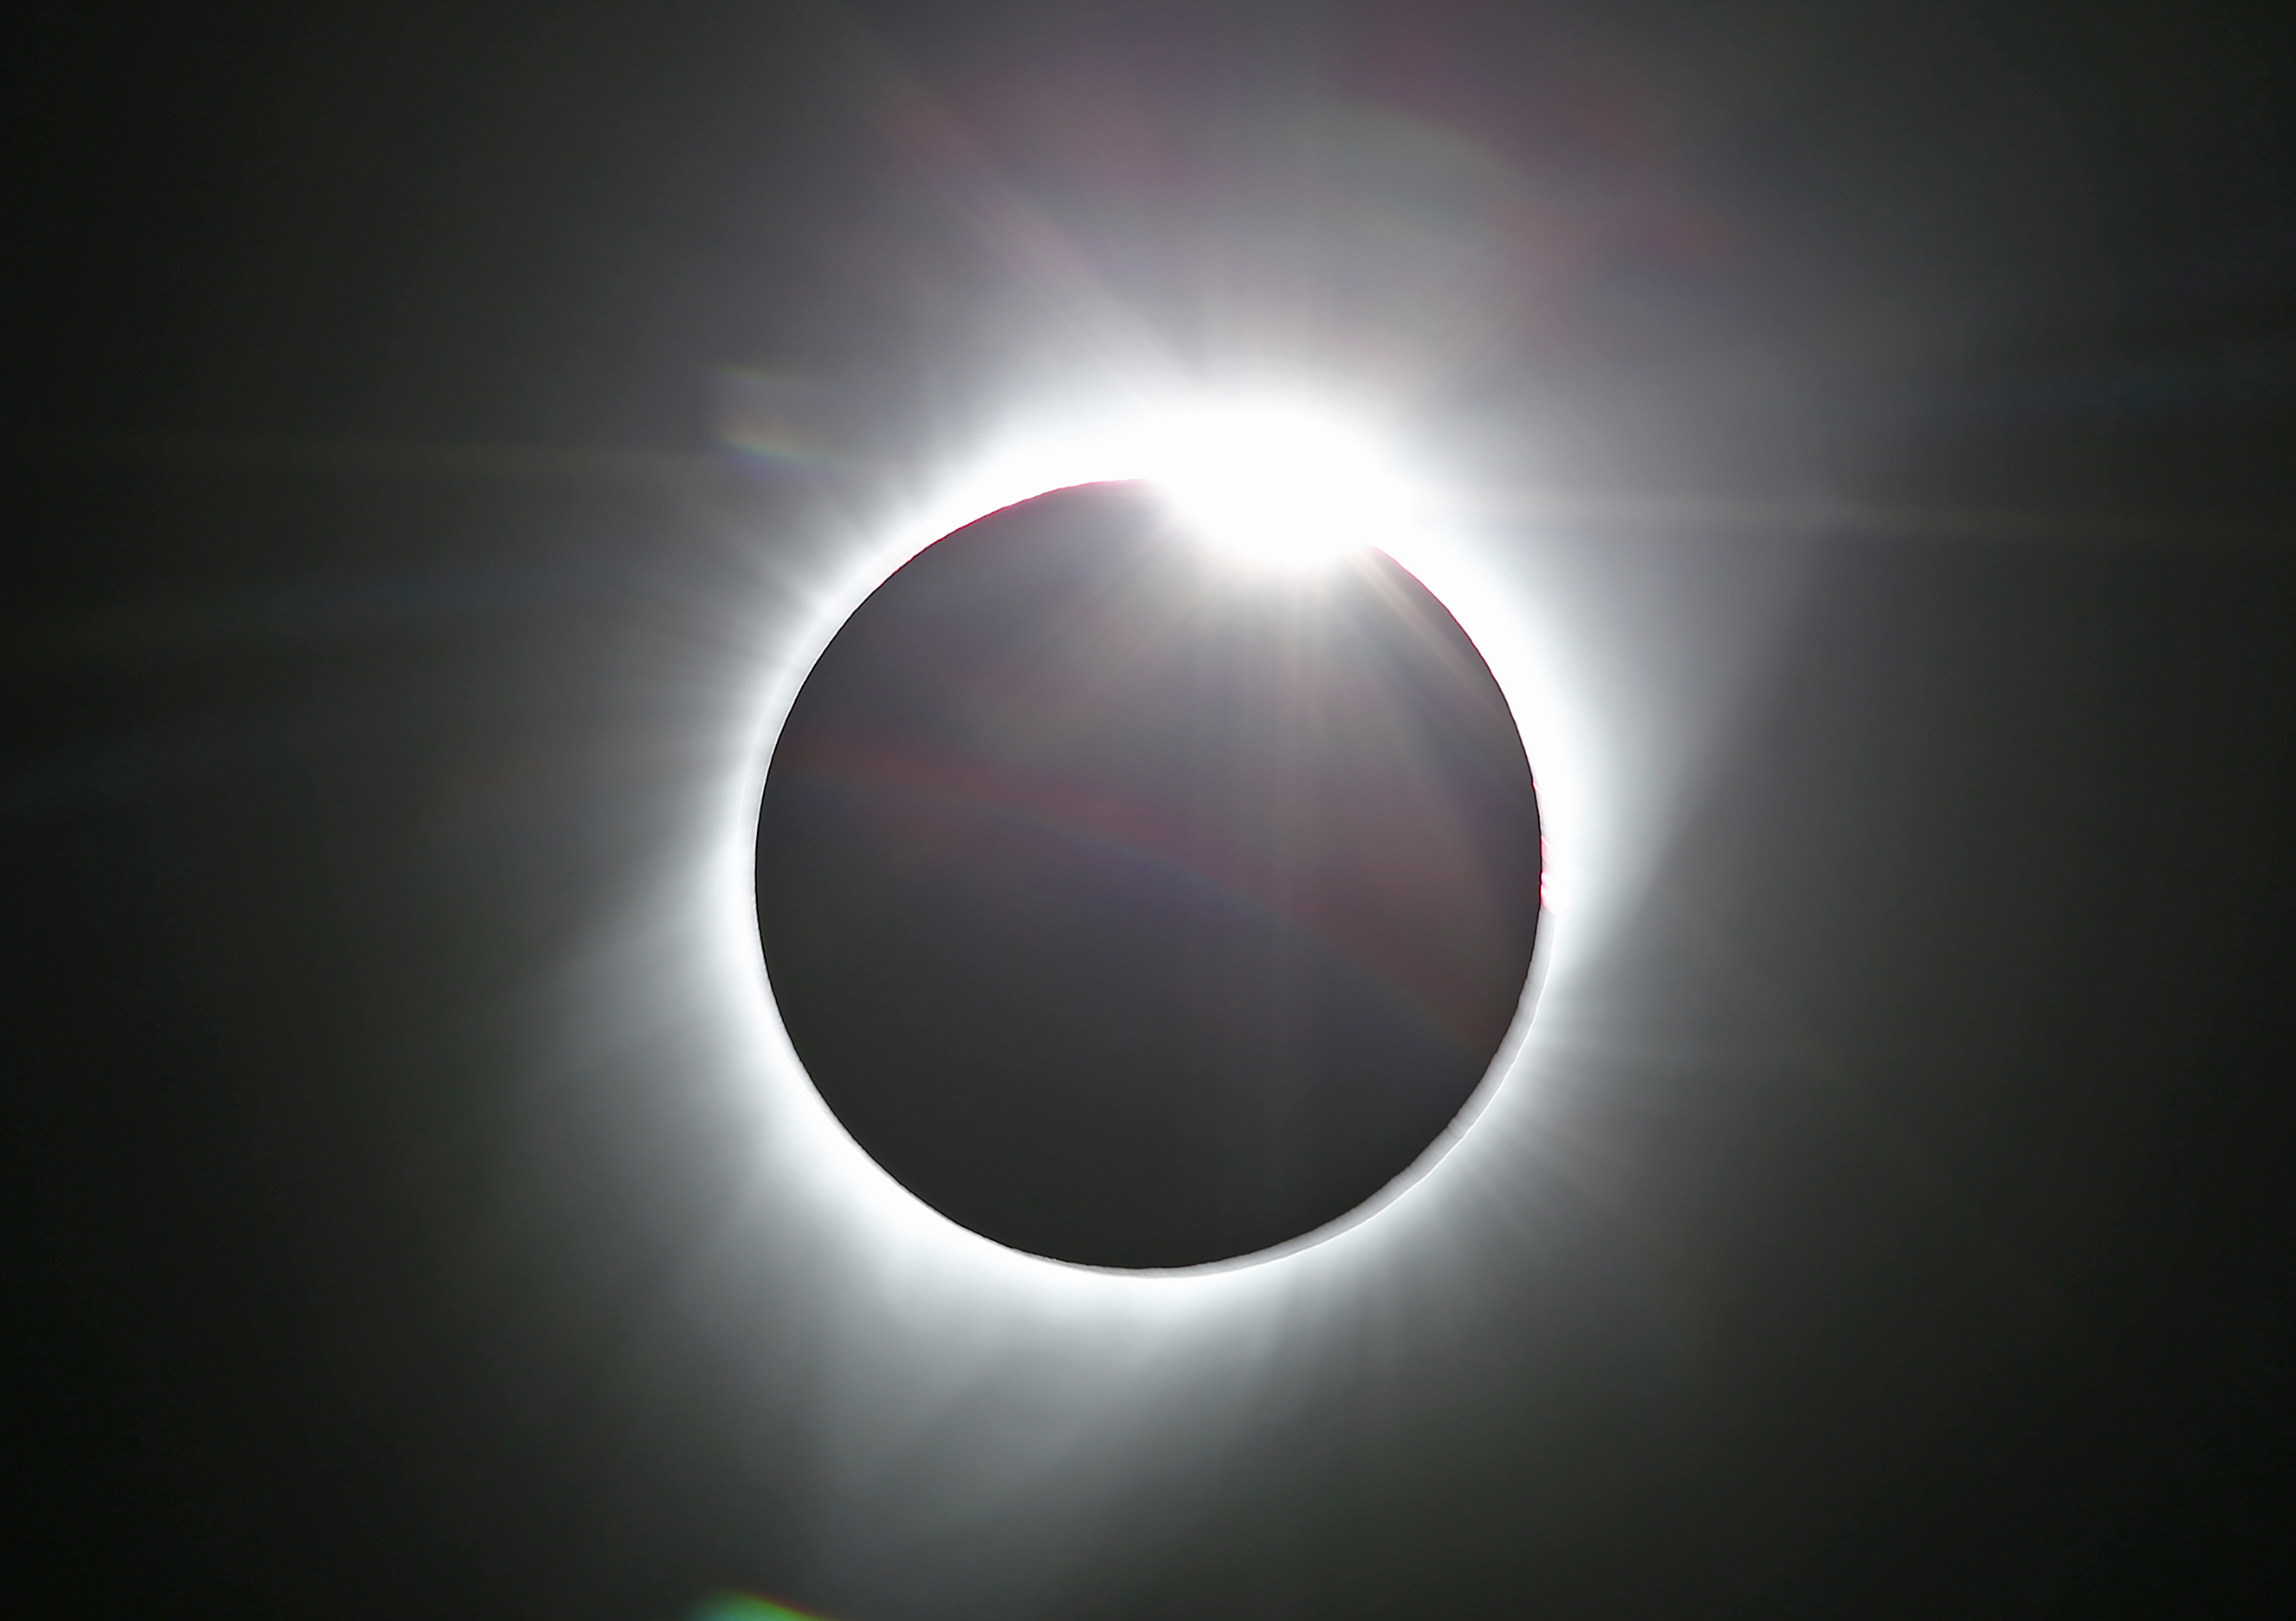 A solar eclipse with the Sun's corona visible around the moon's silhouette.